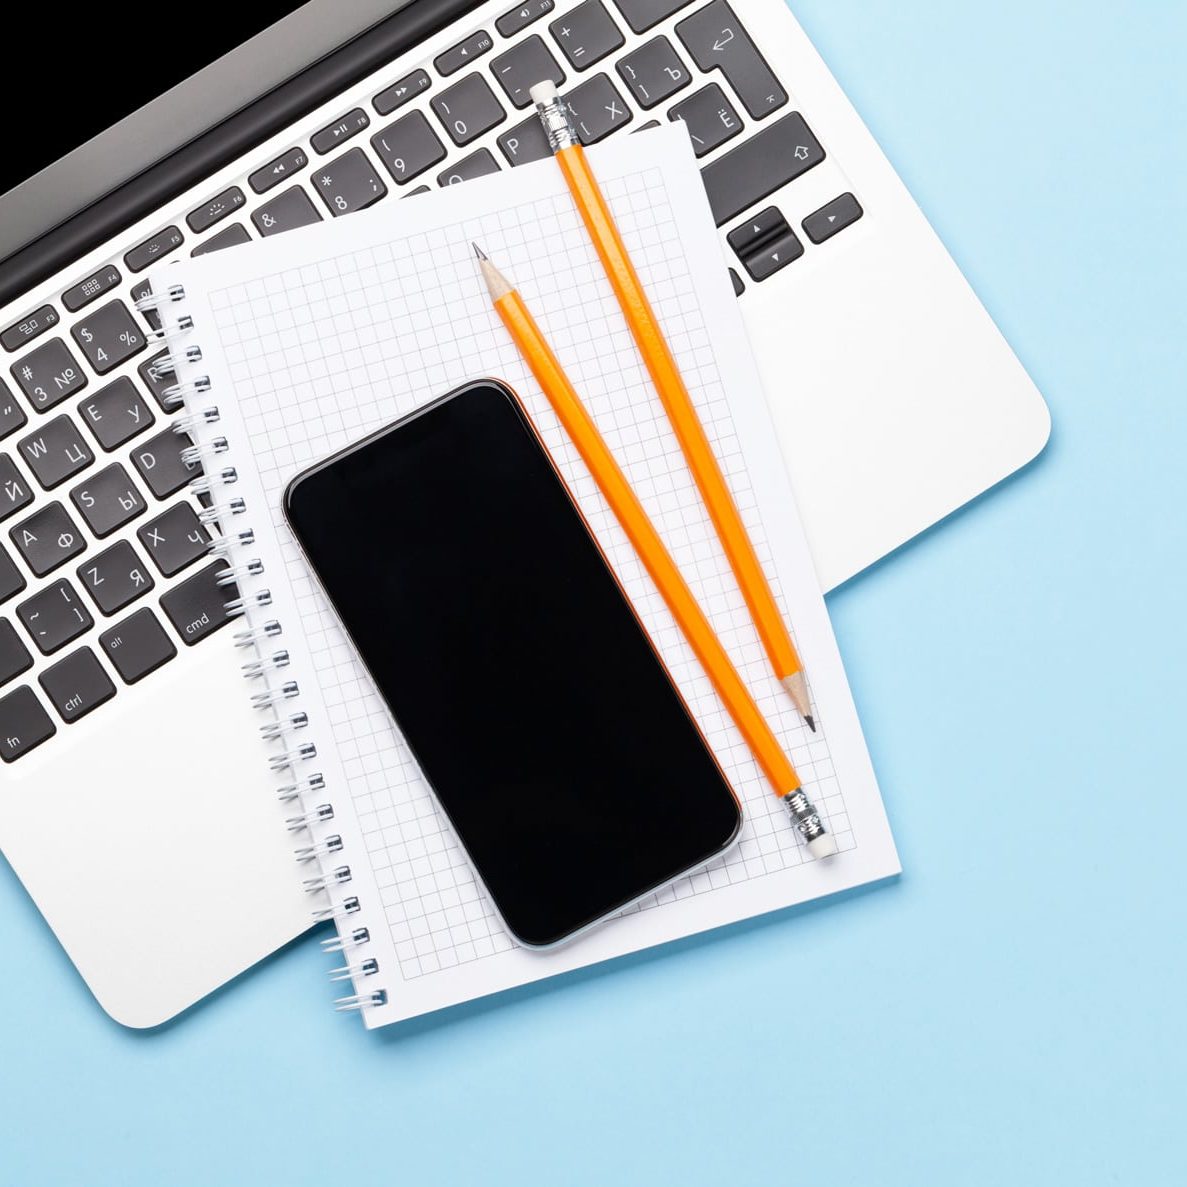 A spiral notebook with two orange pencils lays on top of an open laptop. There is a black cellphone on top of the notebook.